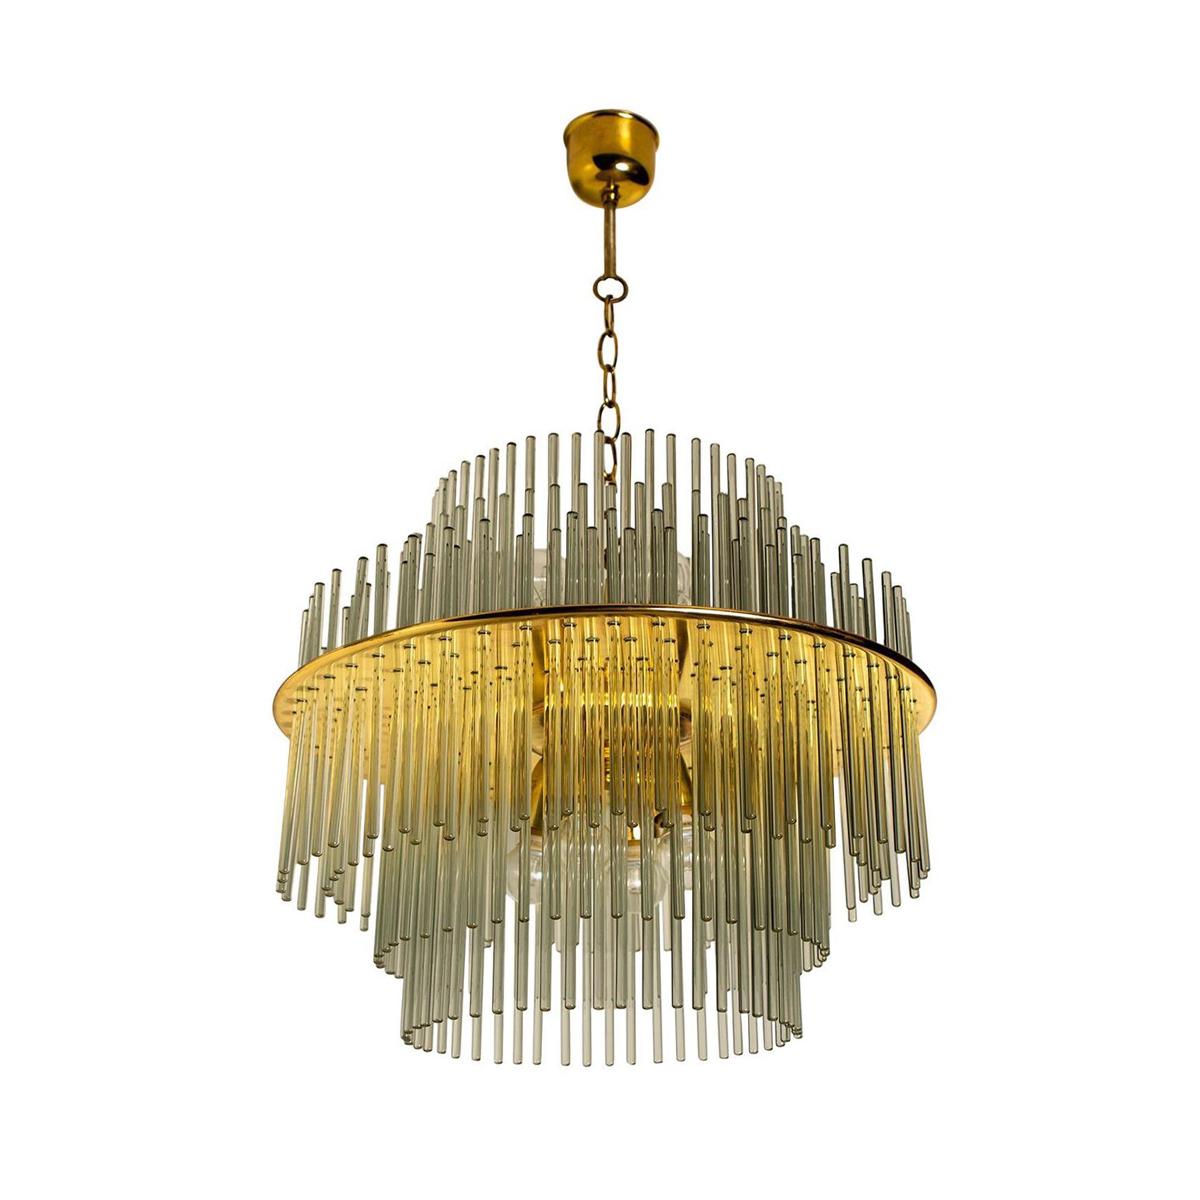 Designed by the renowned Italian designer Gaetano Sciolari and manufactured in the USA by Lightolier, this stunning chandelier epitomises the bold and opulent style of its time and of vintage elegance, a true testament to the enduring allure of